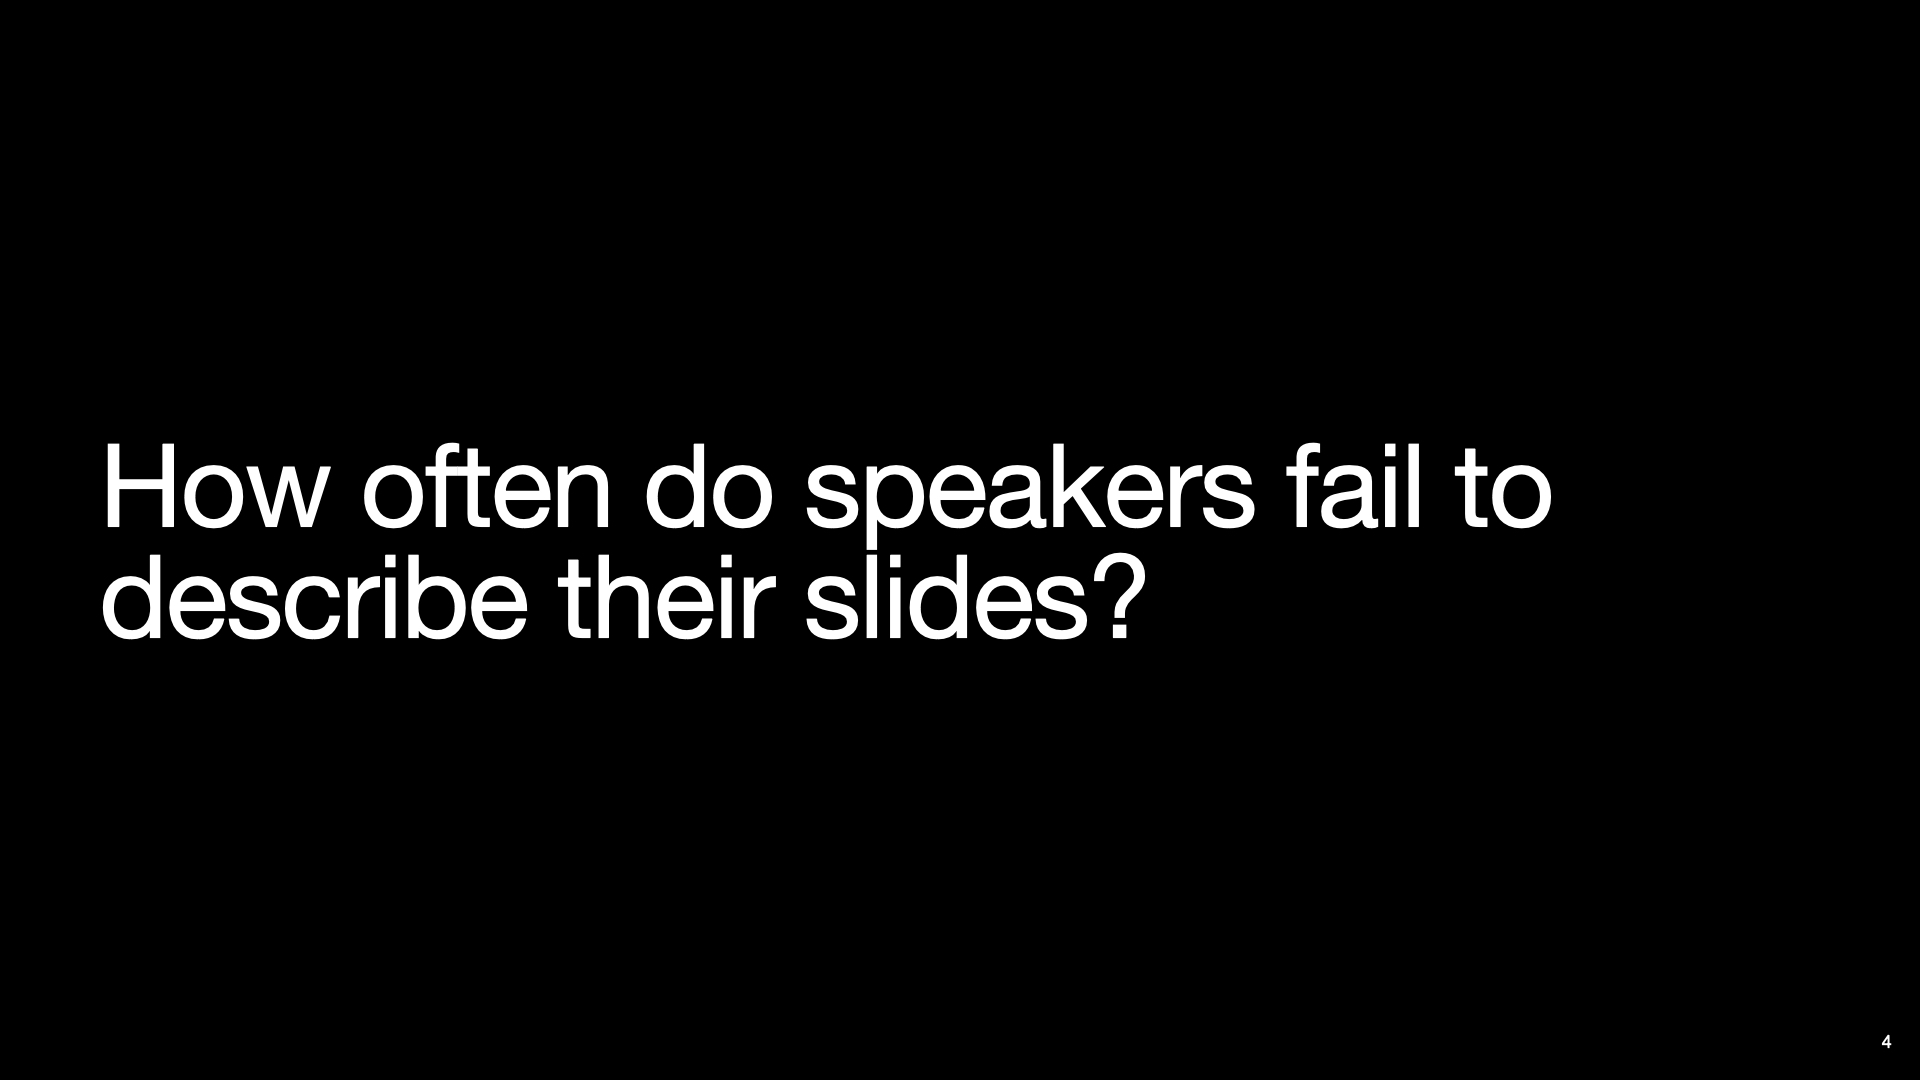 A slide with text “How often do speakers fail to describe their slides?”